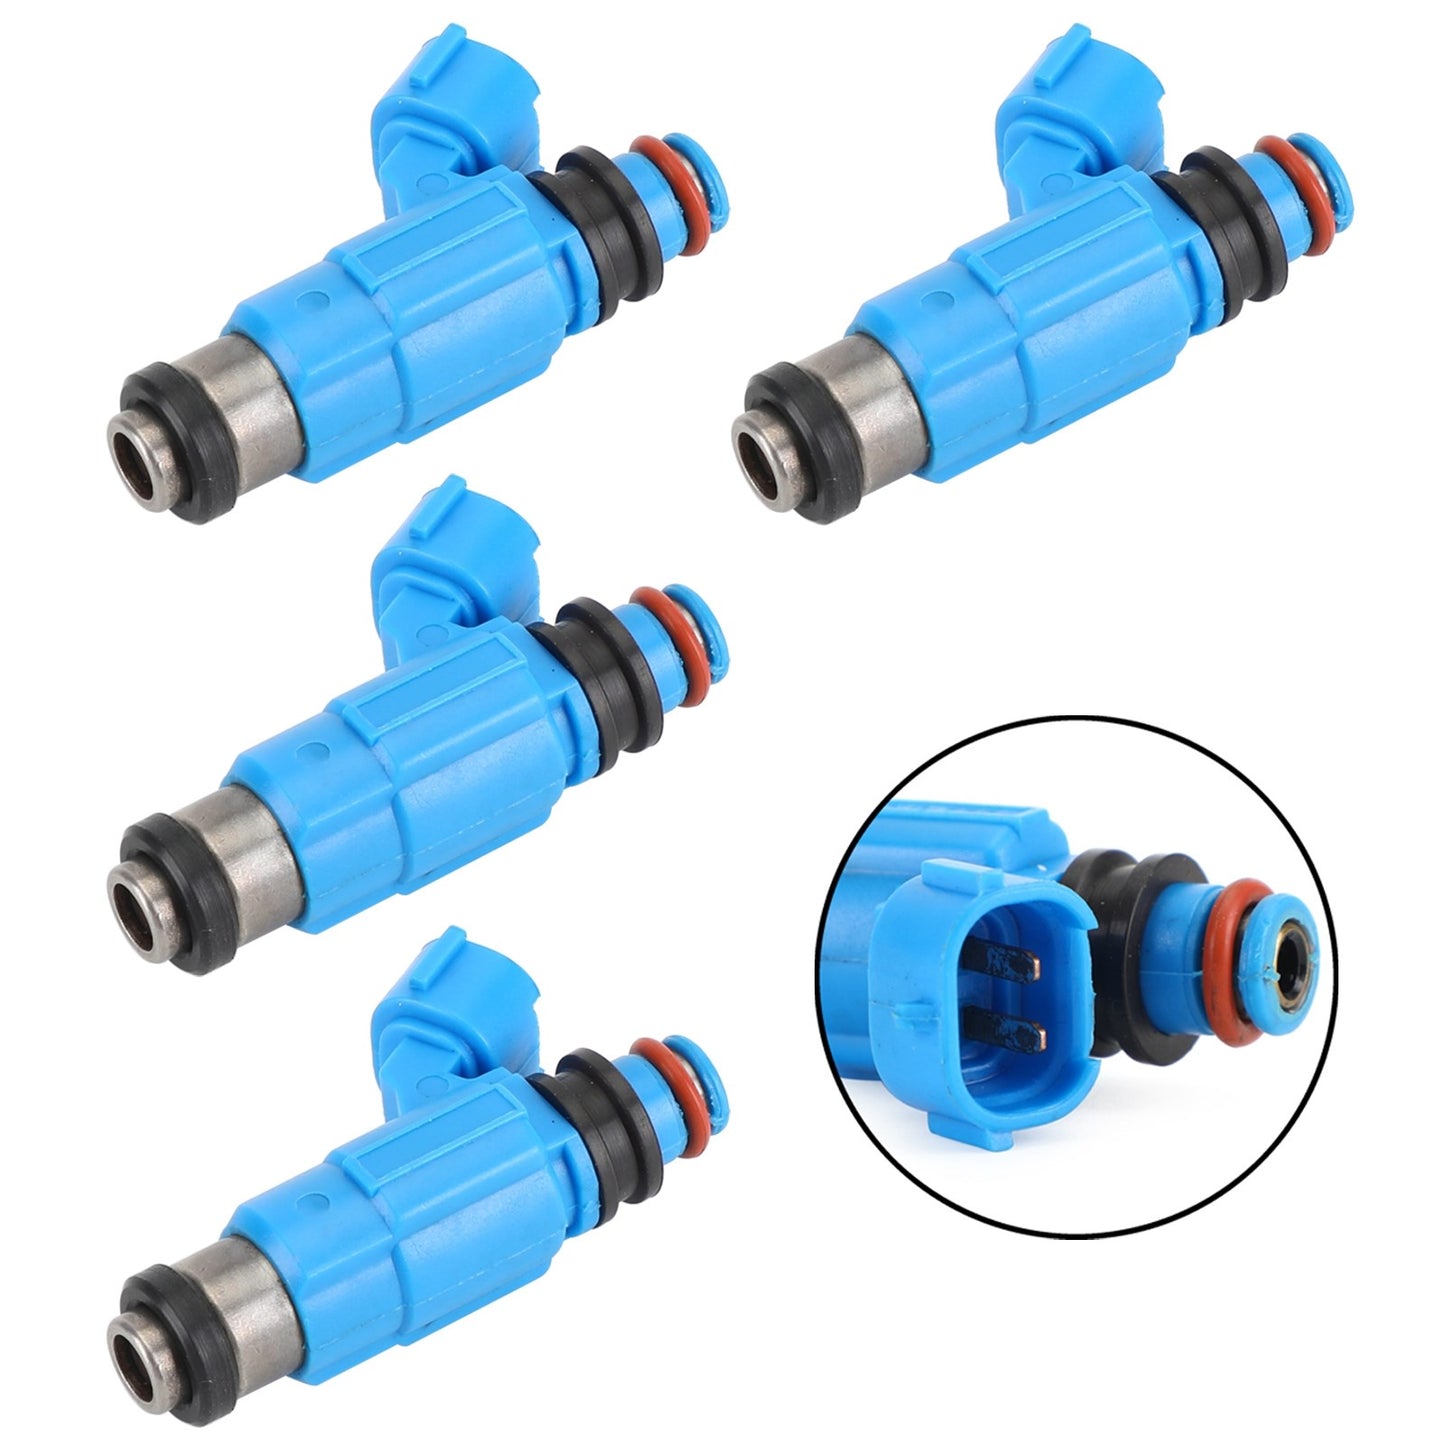 4PCS INP-772 Fuel Injector fit for Suzuki Carry fit Mazda BT-50/B-2.6